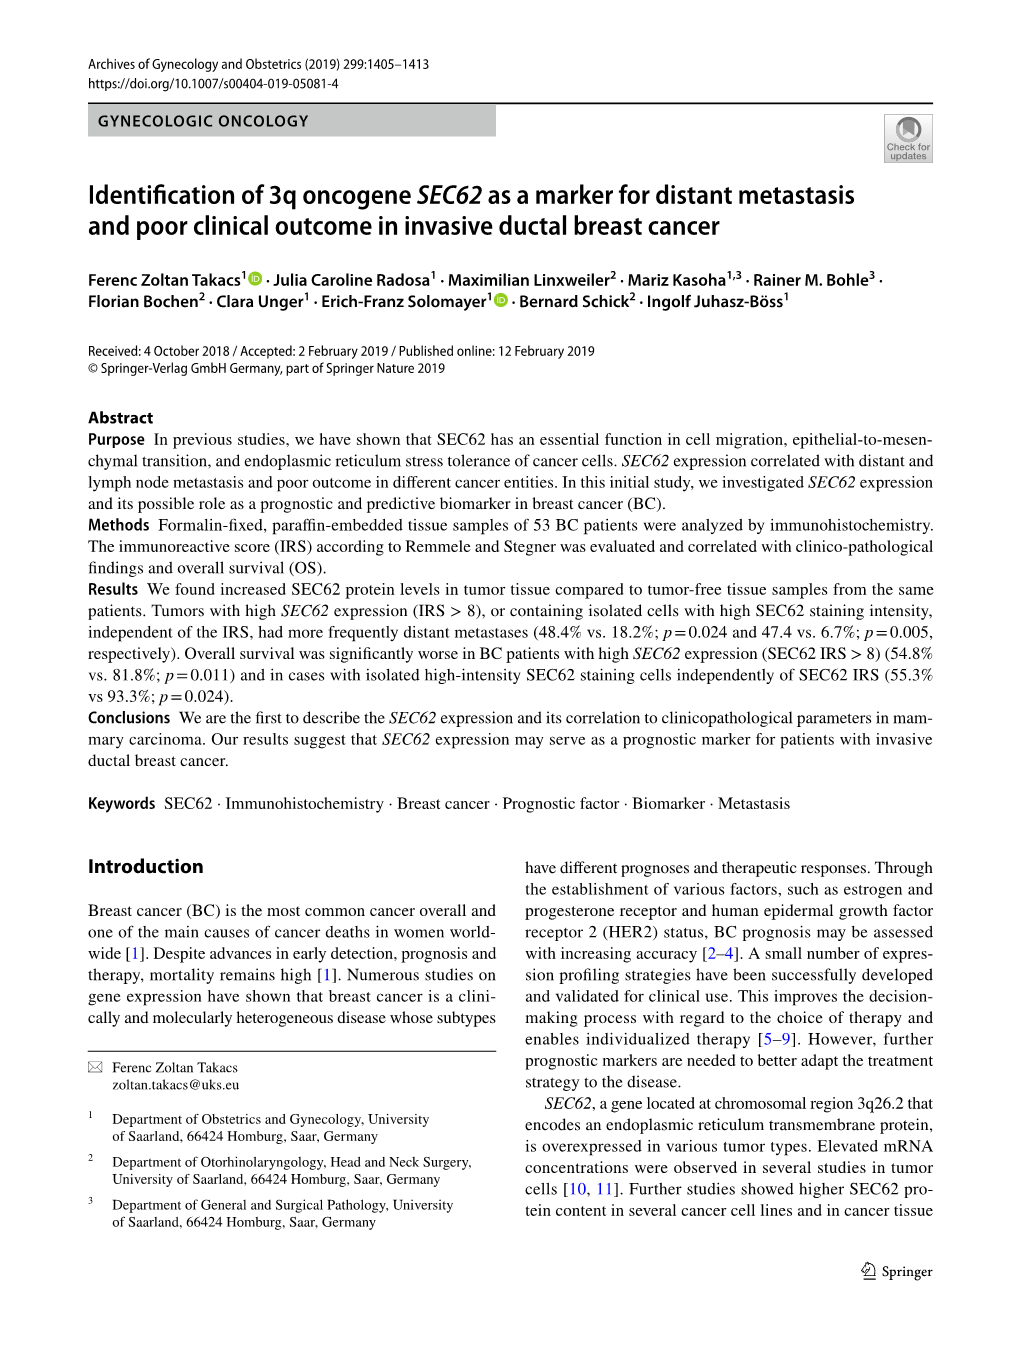 Identification of 3Q Oncogene SEC62 As a Marker for Distant Metastasis and Poor Clinical Outcome in Invasive Ductal Breast Cance